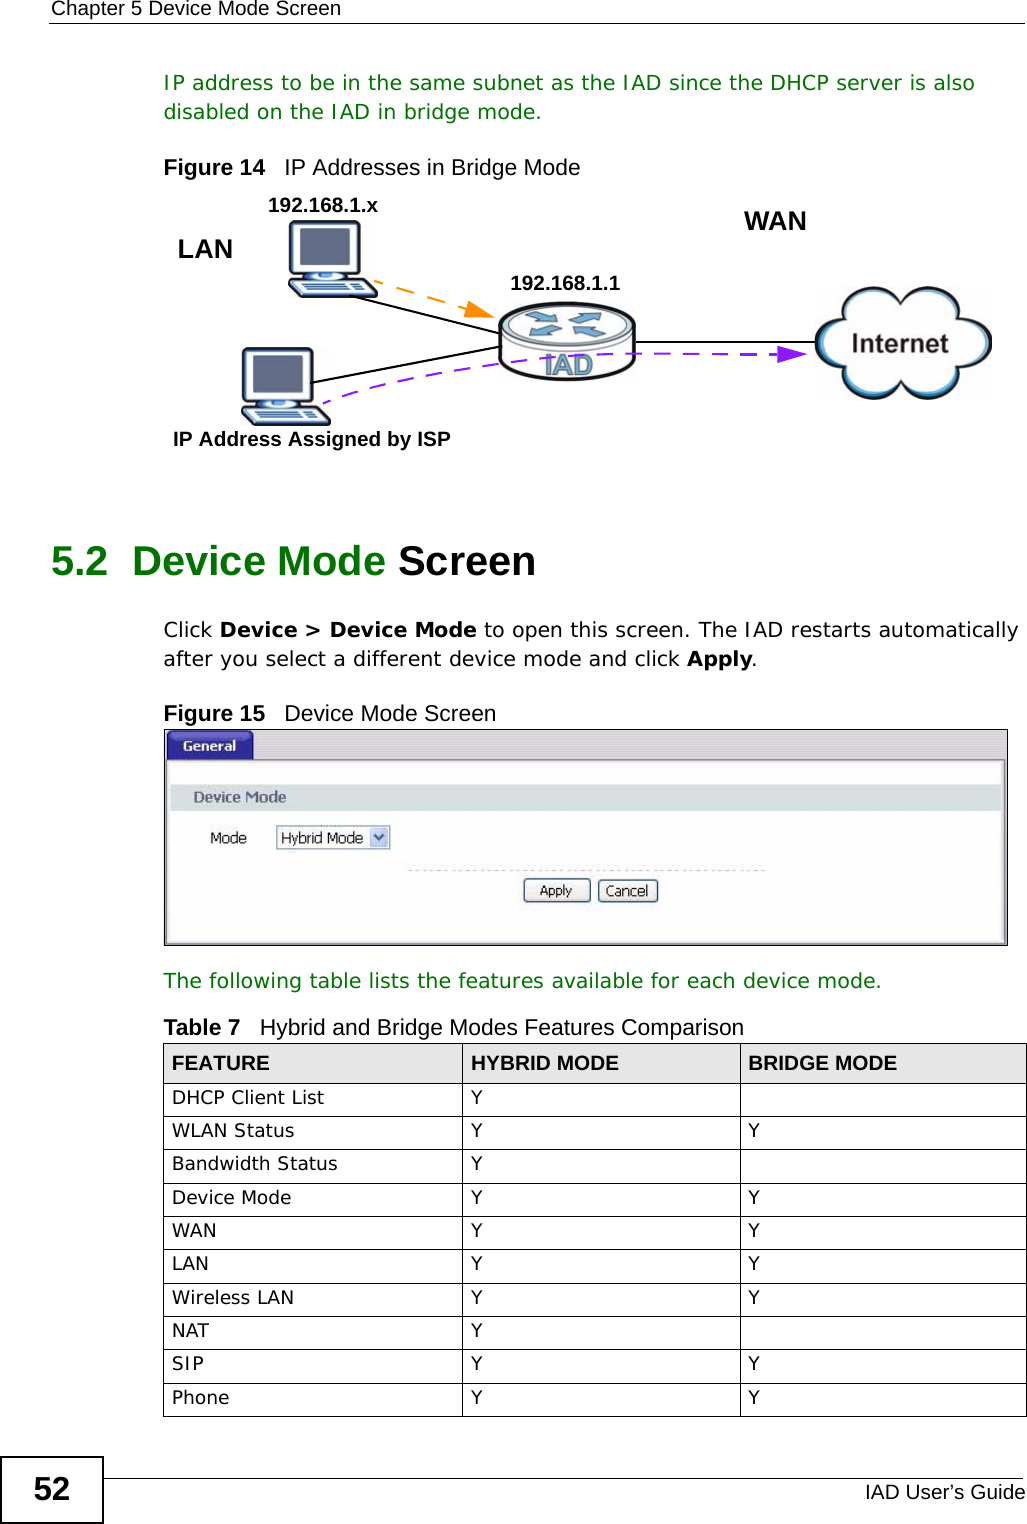 Chapter 5 Device Mode ScreenIAD User’s Guide52IP address to be in the same subnet as the IAD since the DHCP server is also disabled on the IAD in bridge mode. Figure 14   IP Addresses in Bridge Mode5.2  Device Mode Screen Click Device &gt; Device Mode to open this screen. The IAD restarts automatically after you select a different device mode and click Apply.Figure 15   Device Mode ScreenThe following table lists the features available for each device mode.  WANLAN192.168.1.1192.168.1.xIP Address Assigned by ISPTable 7   Hybrid and Bridge Modes Features ComparisonFEATURE HYBRID MODE BRIDGE MODEDHCP Client List YWLAN Status Y YBandwidth Status YDevice Mode Y YWAN Y YLAN Y YWireless LAN Y YNAT YSIP Y YPhone Y Y